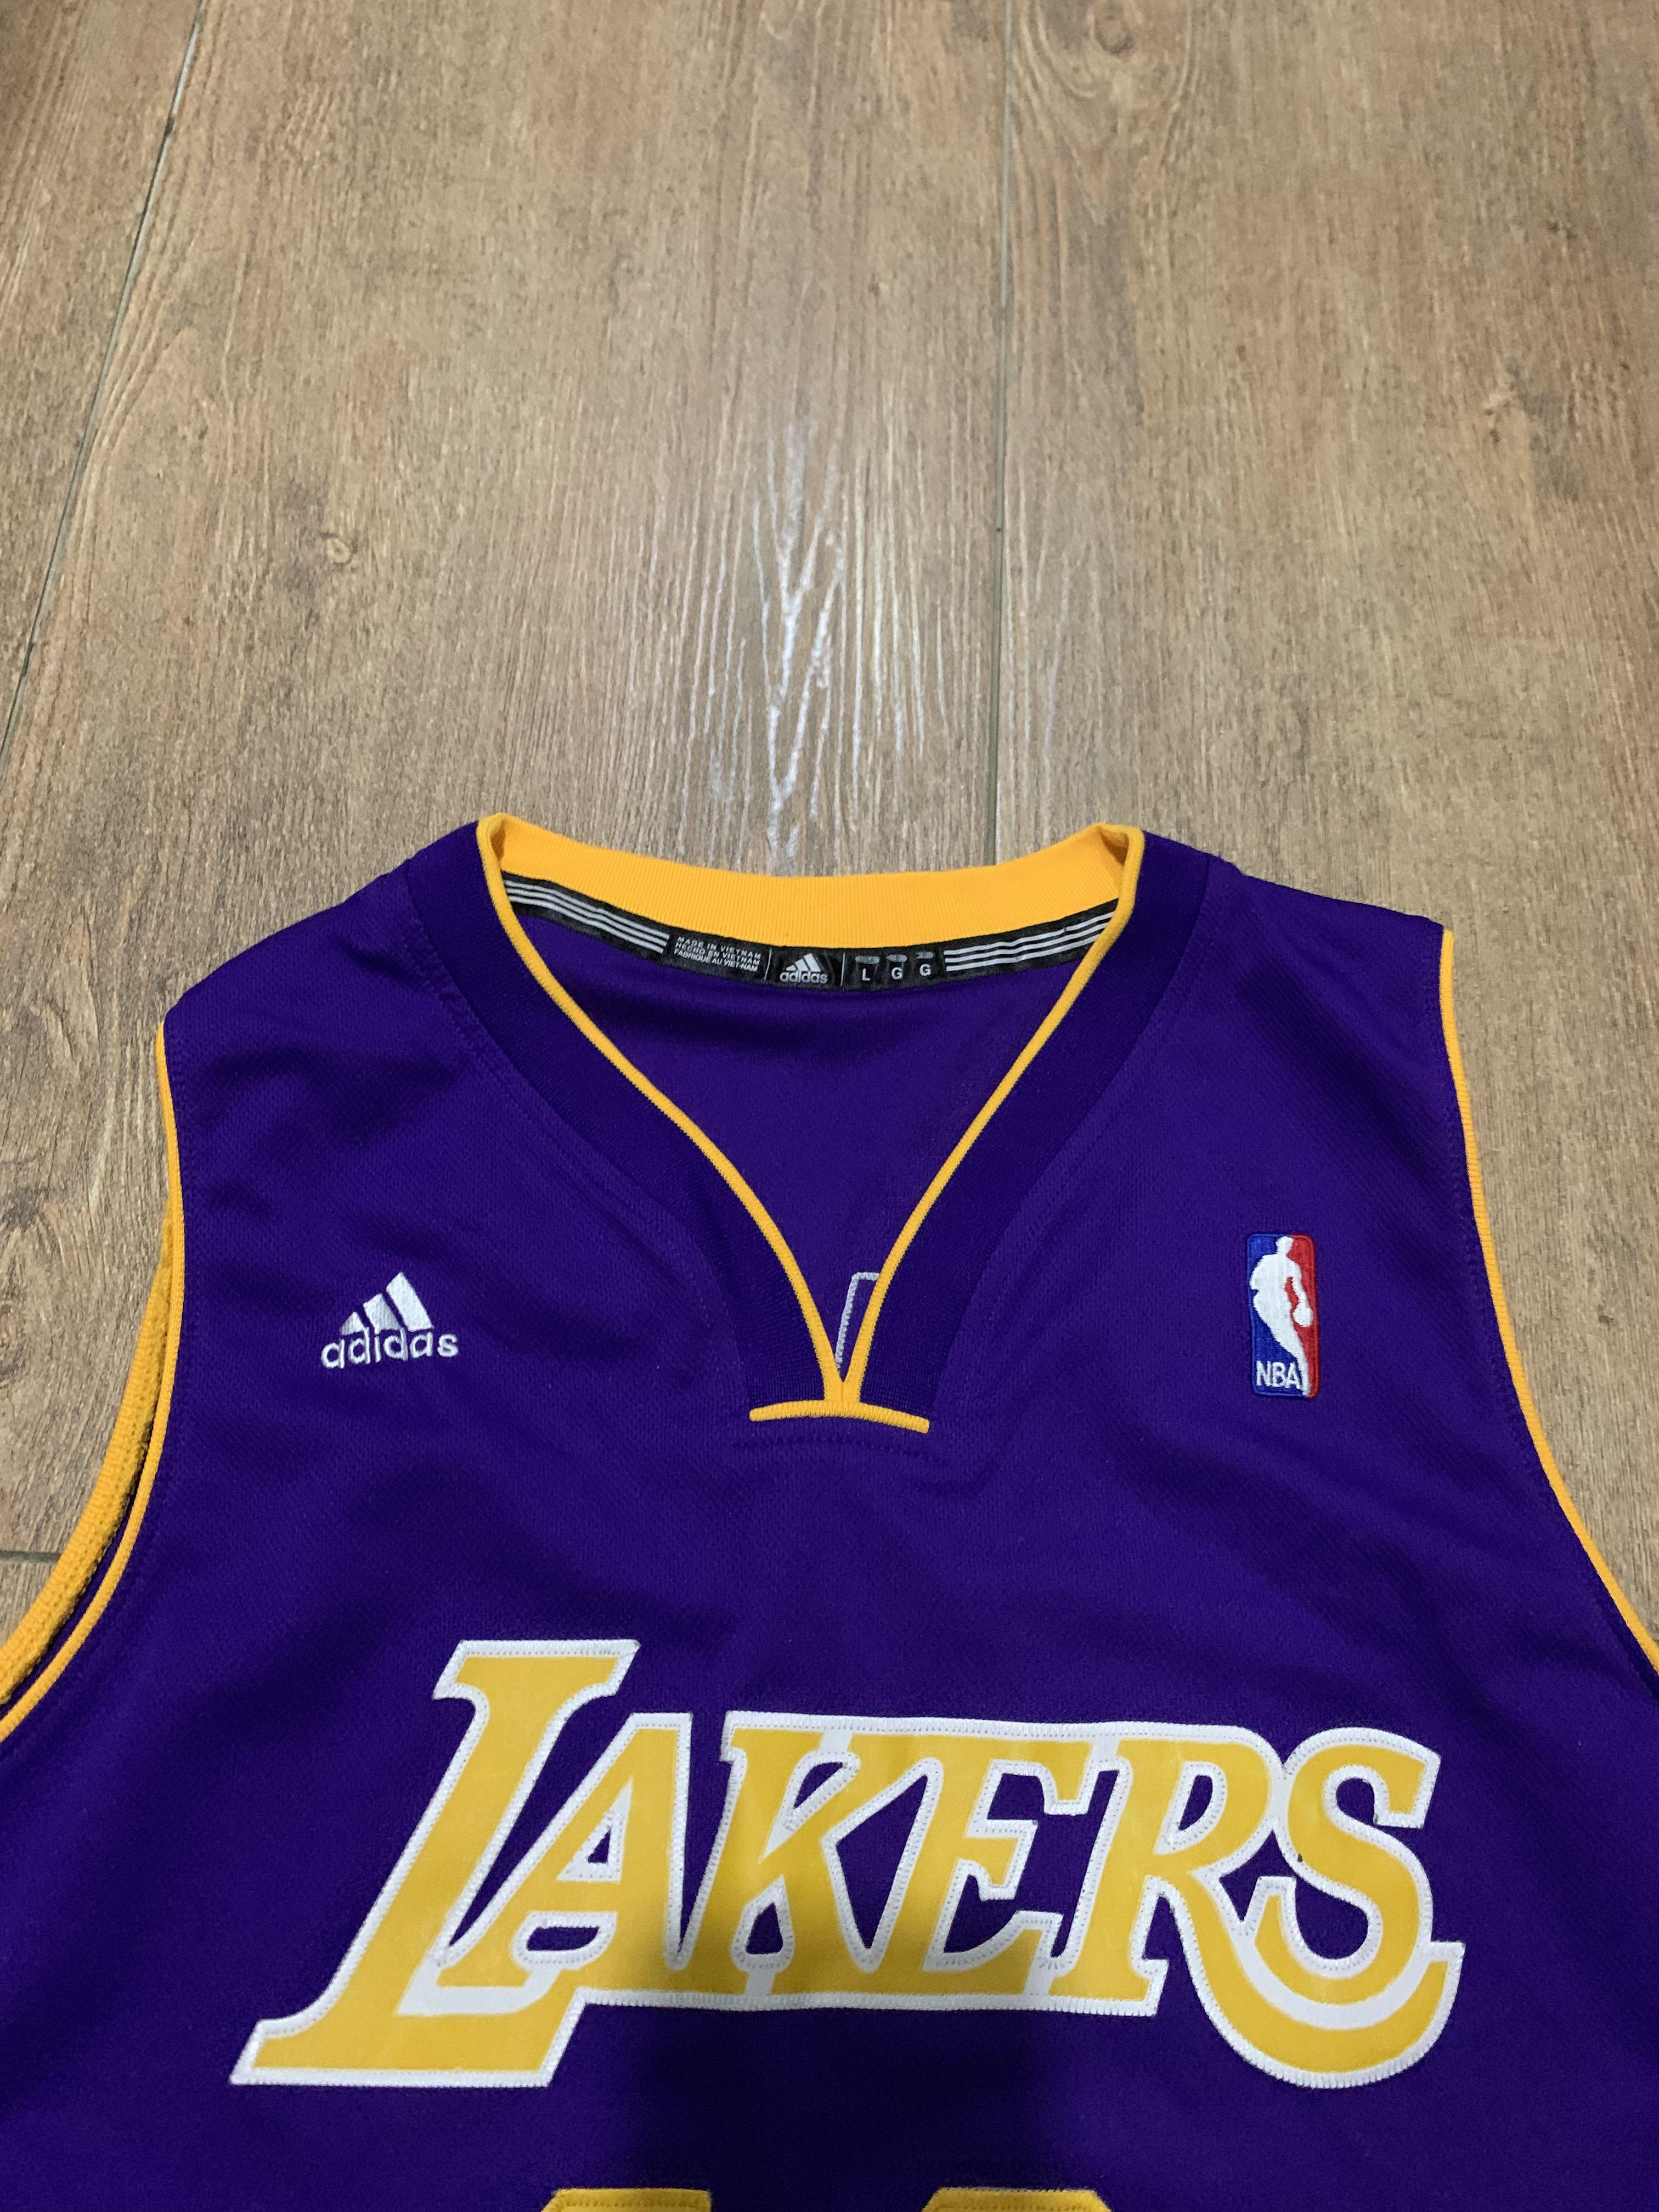 LA Lakers Adidas Jersey Size L, Men's Fashion, Activewear on Carousell